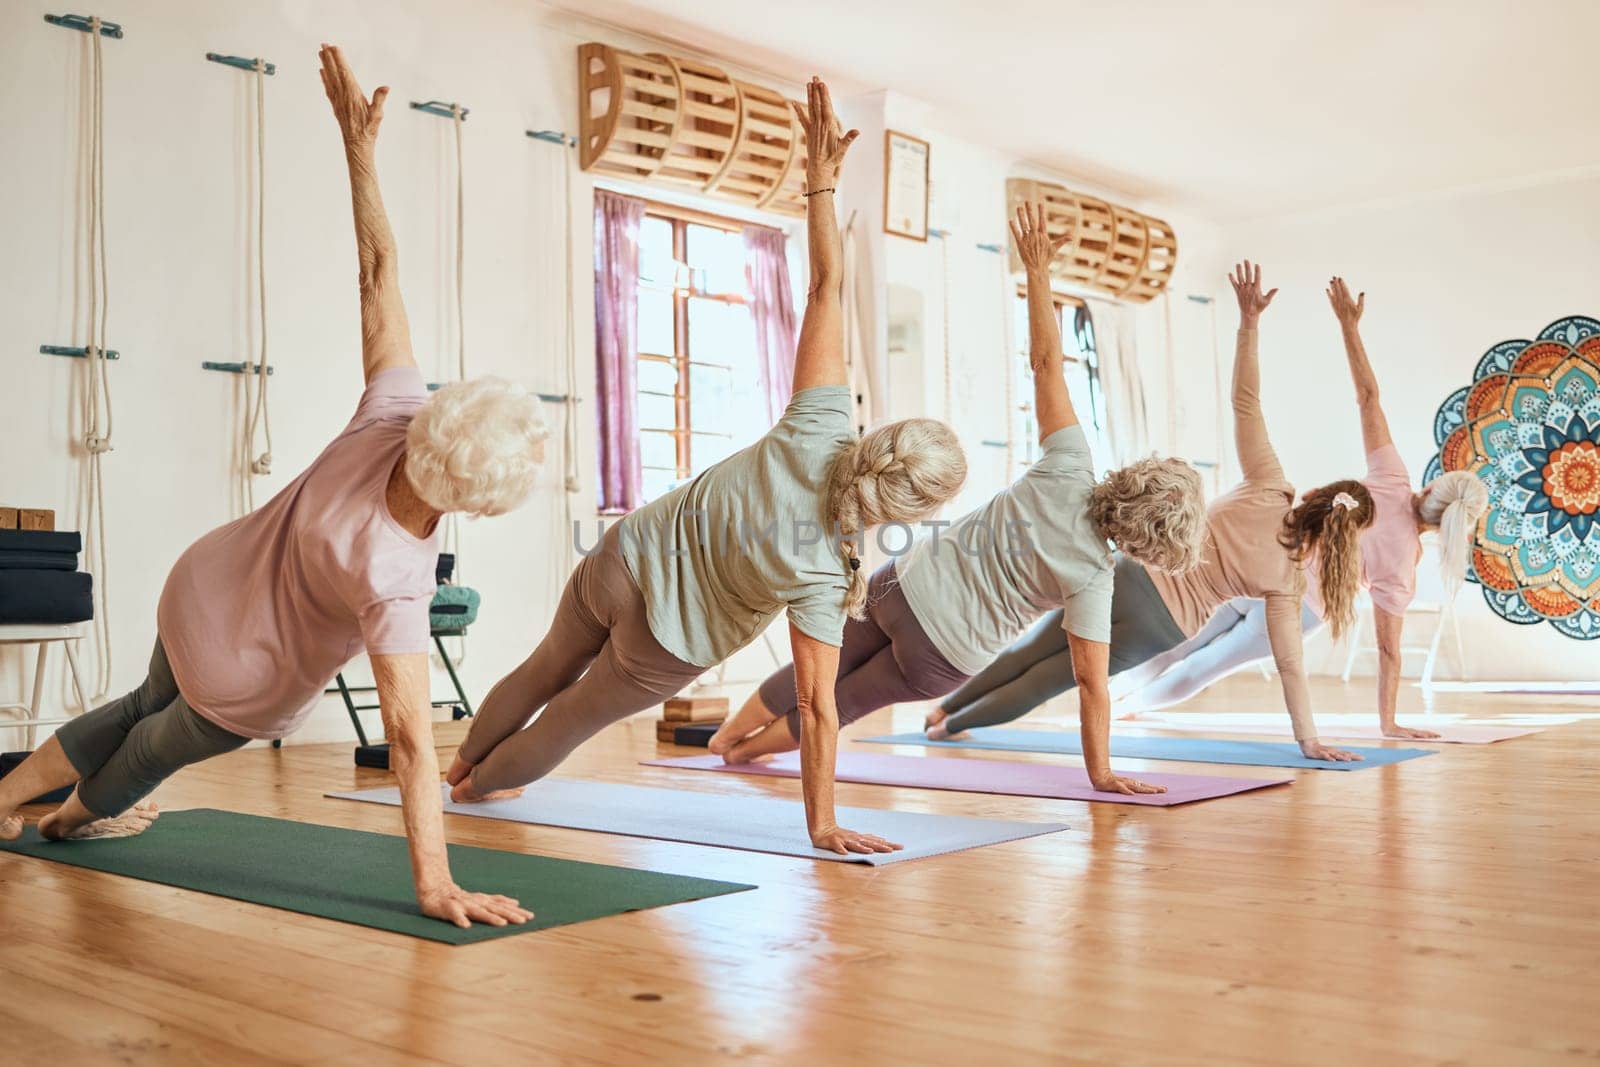 Yoga, class and group for elderly woman in health, fitness or zen meditation on gym floor. Workout, women and stretching for wellness, peace or calm balance exercise in mindfulness training together by YuriArcurs